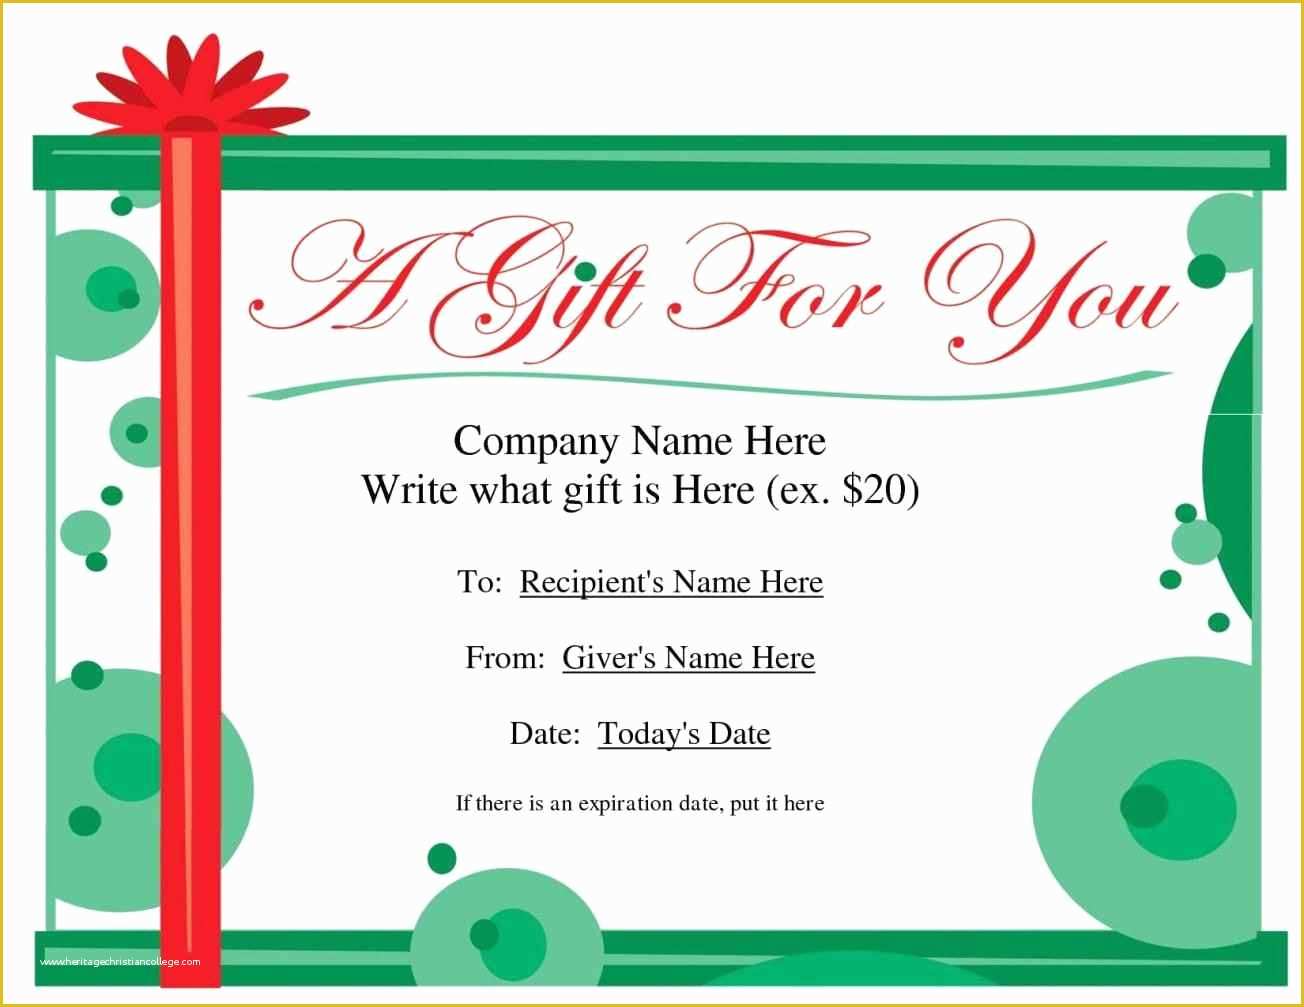 How To Make A Gift Certificate In Word